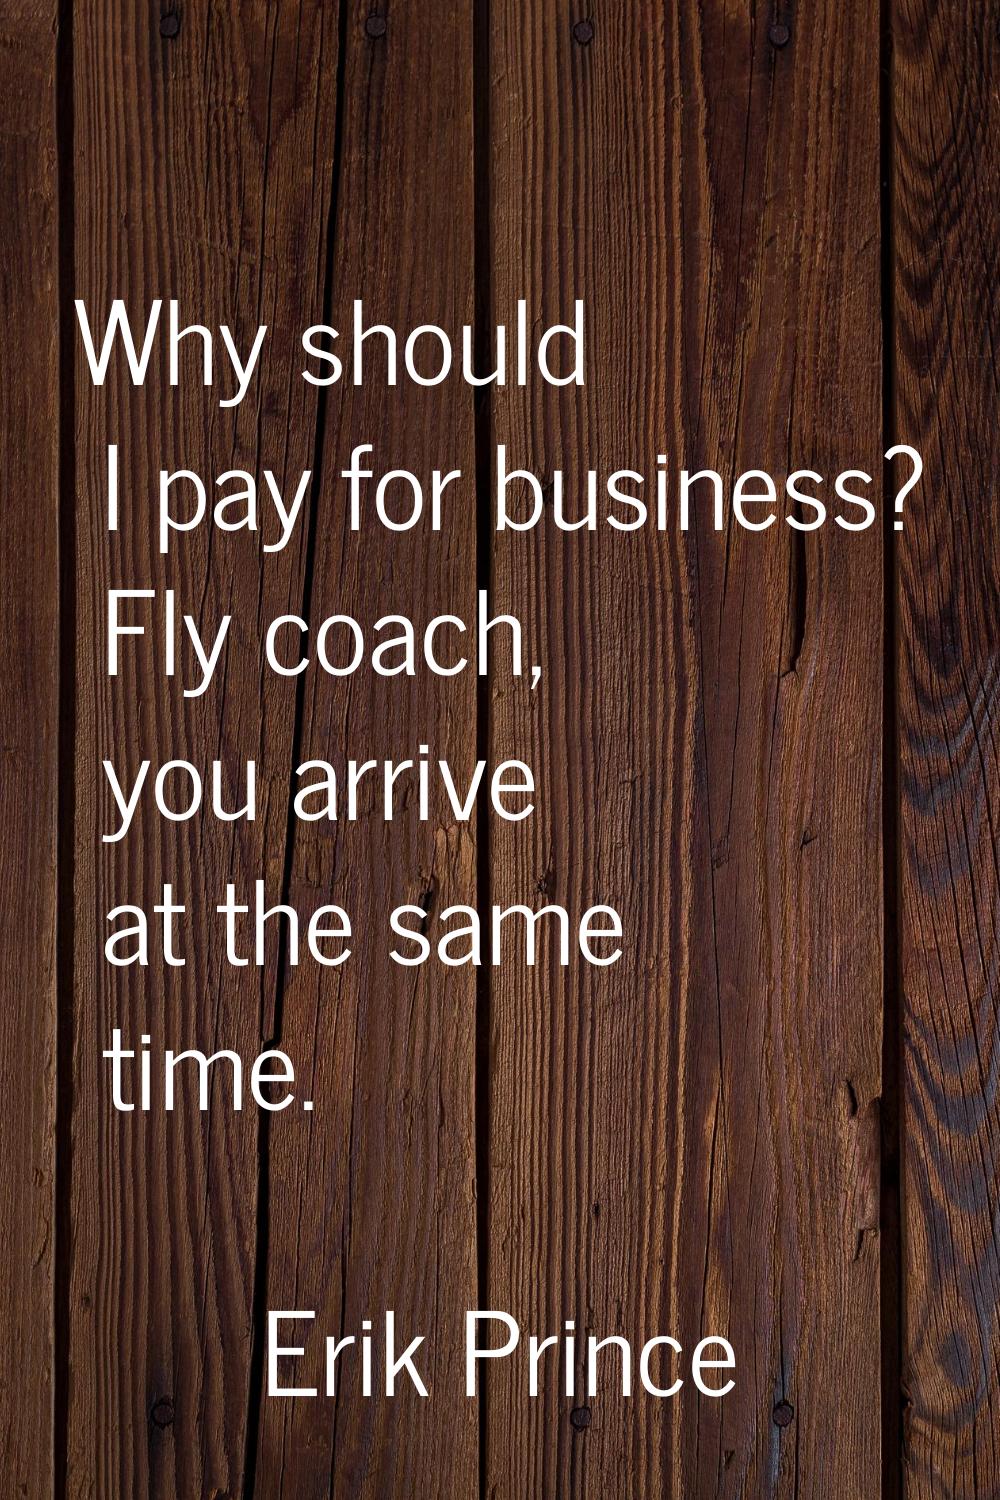 Why should I pay for business? Fly coach, you arrive at the same time.